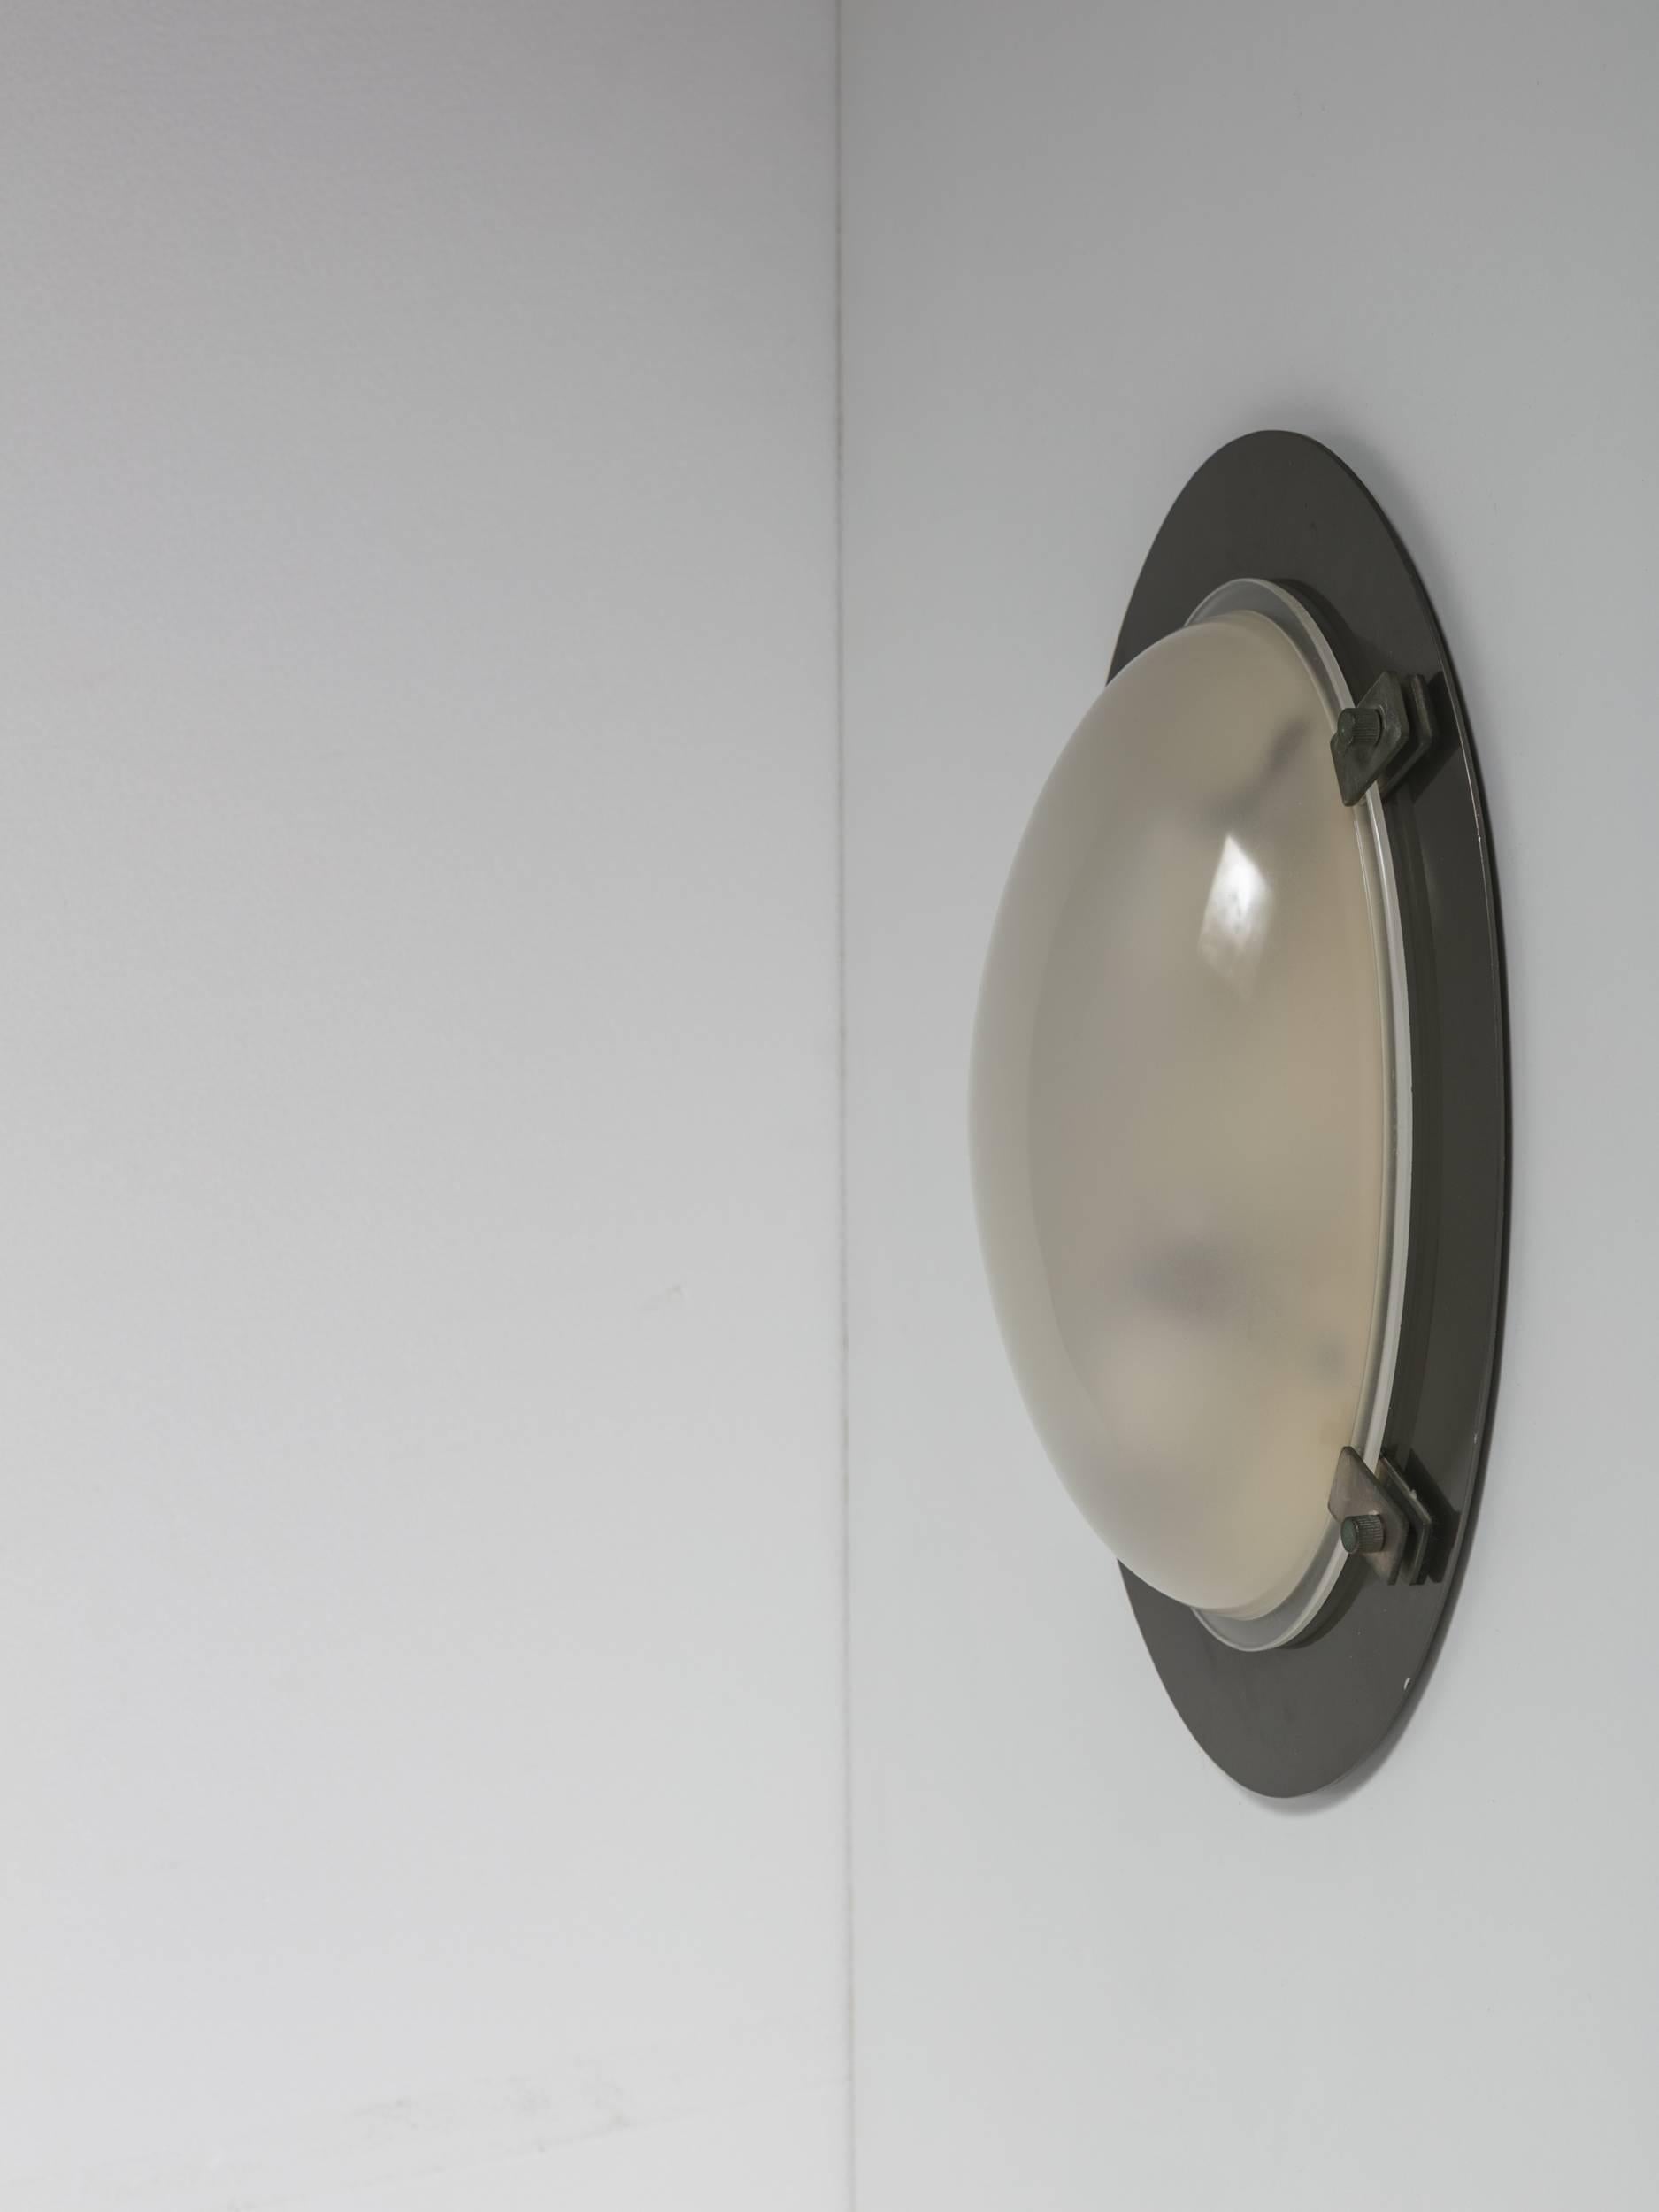 Set of two ceiling, wall lamps model Lsp8 by Ignazio Gardella for Azucena.
Nickel-plated ring with brass details carrying a frosted glass shade.